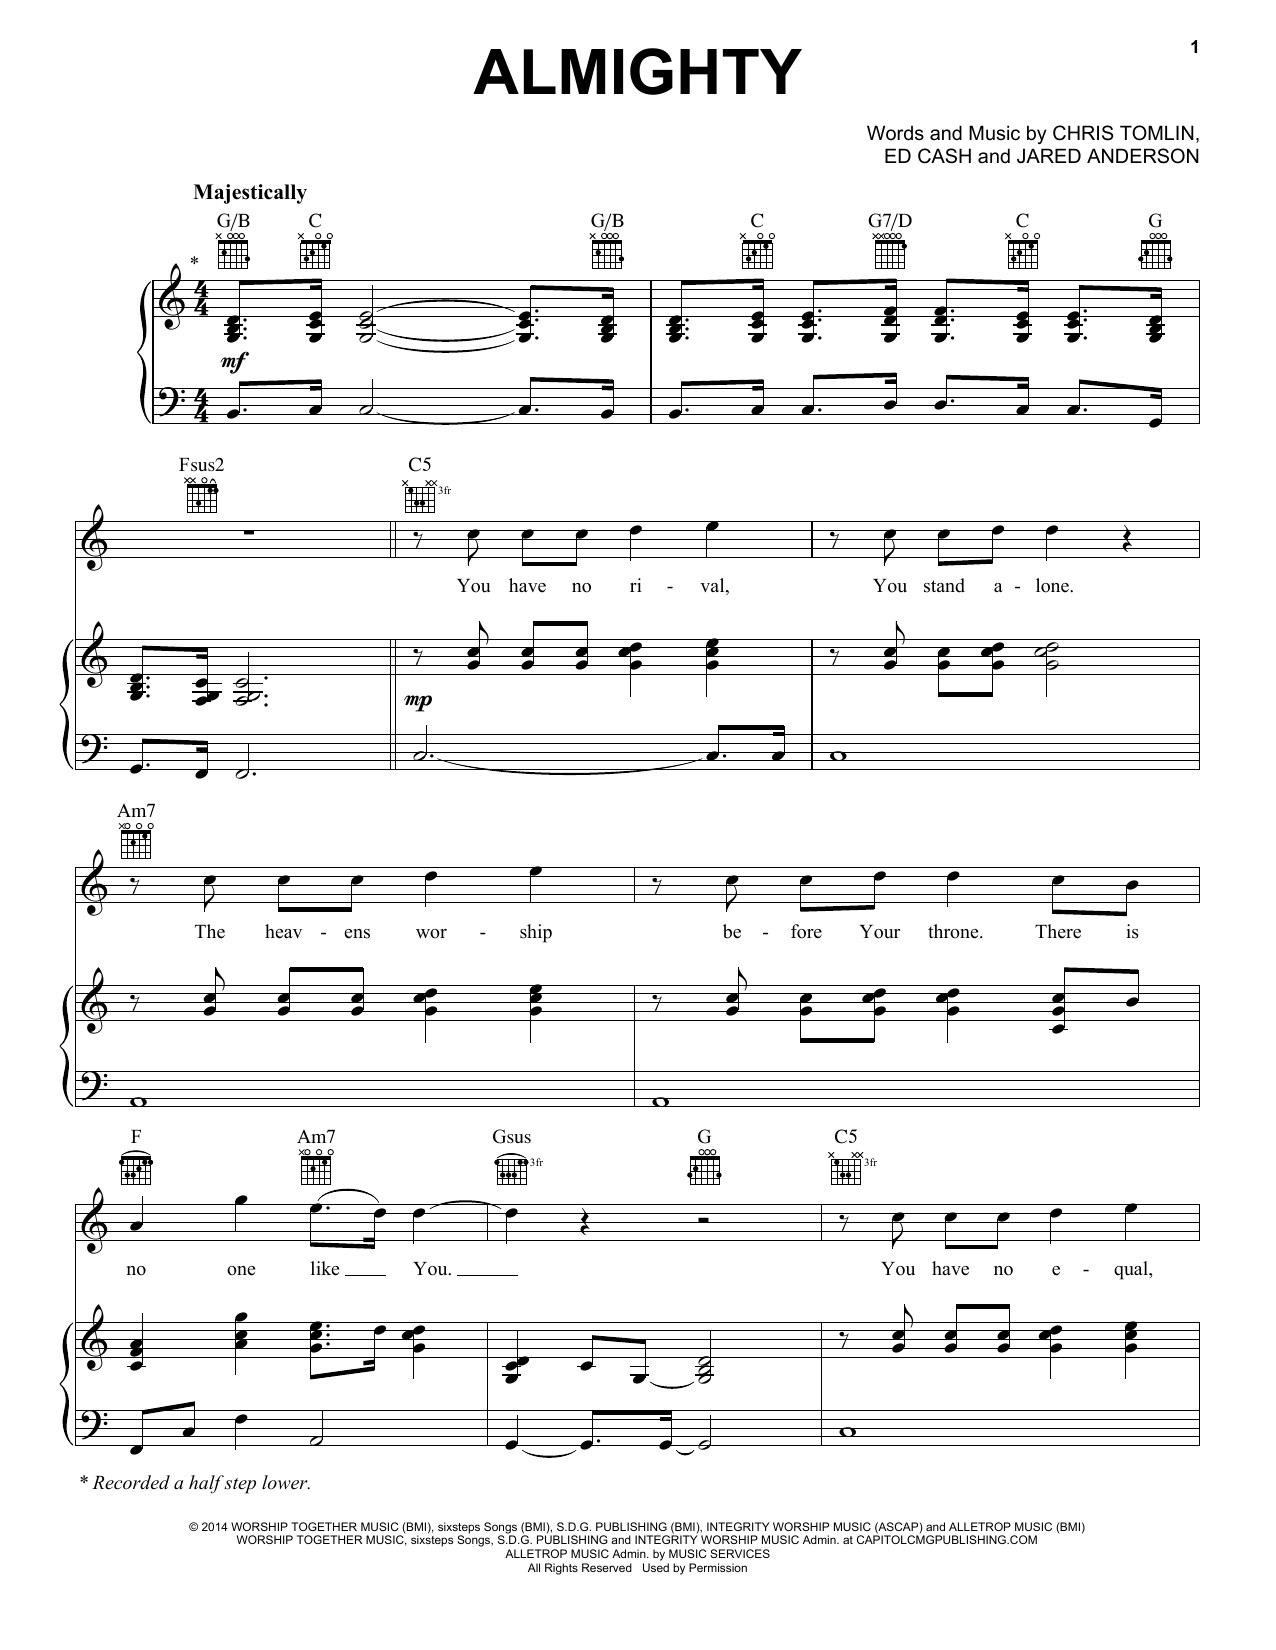 Download Chris Tomlin Almighty Sheet Music